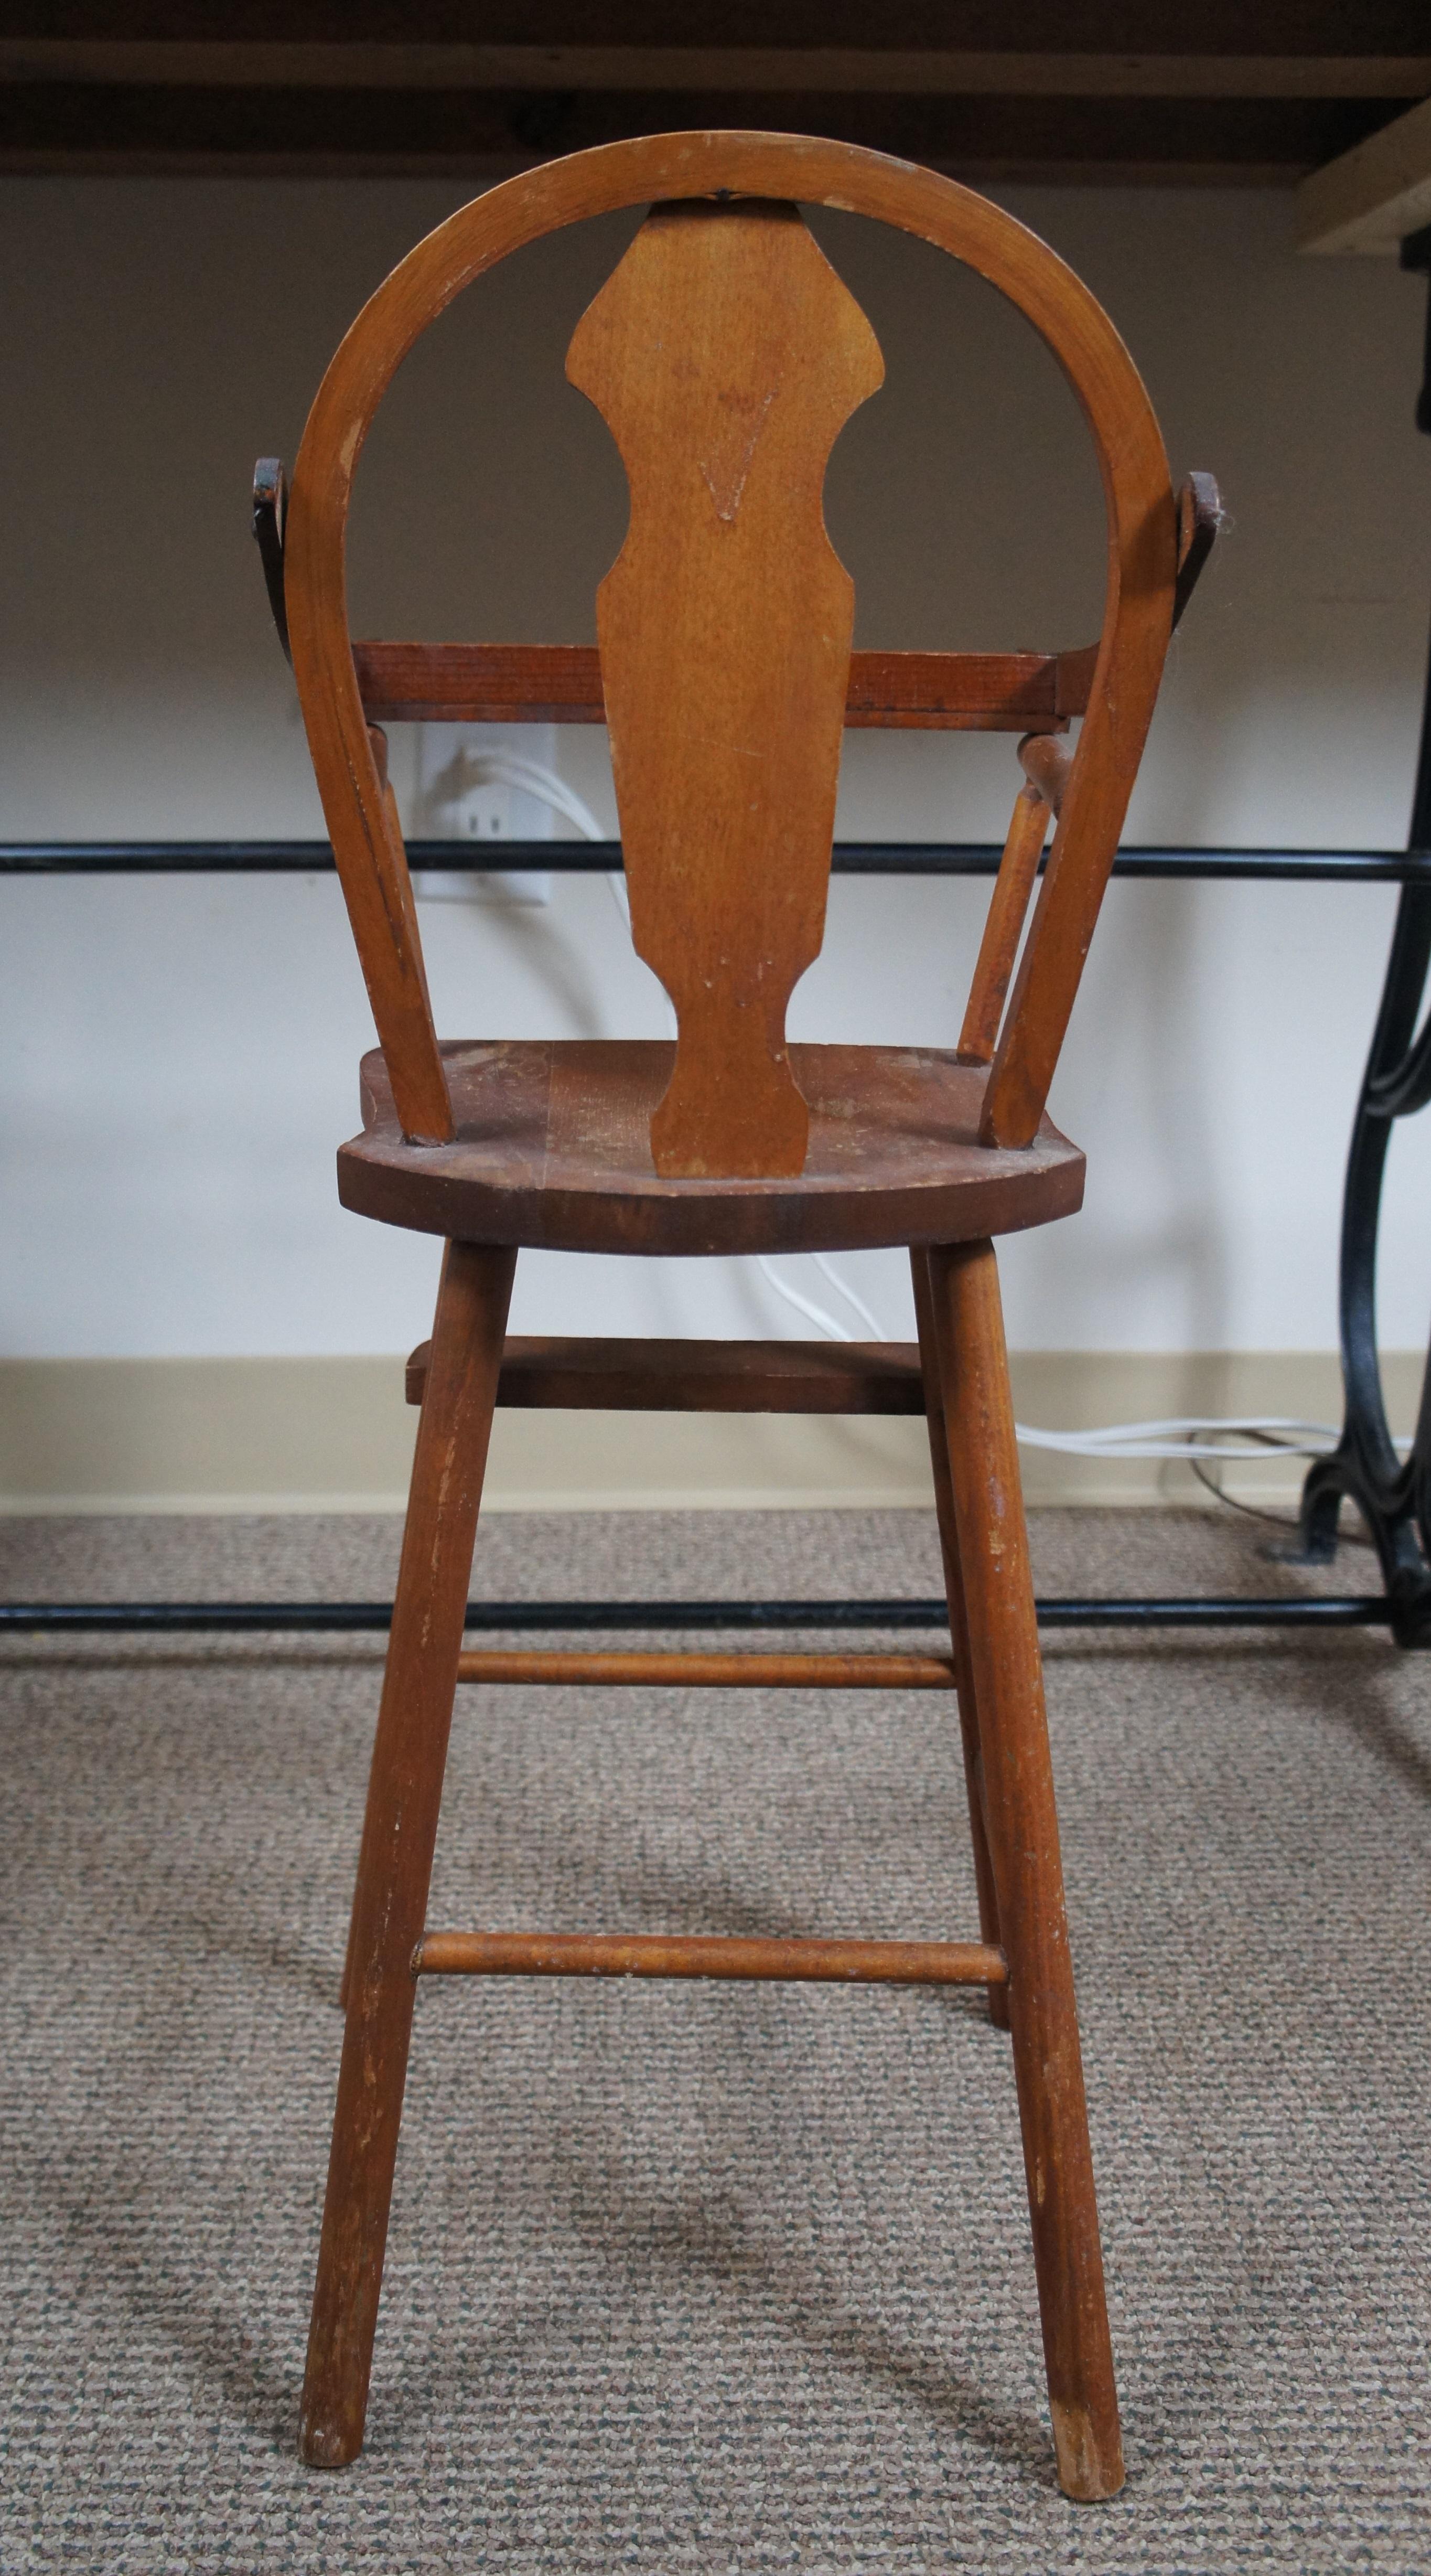 Antique Oak Wood Child Baby Doll Size High Chair W Swing Tray In Good Condition For Sale In Dayton, OH